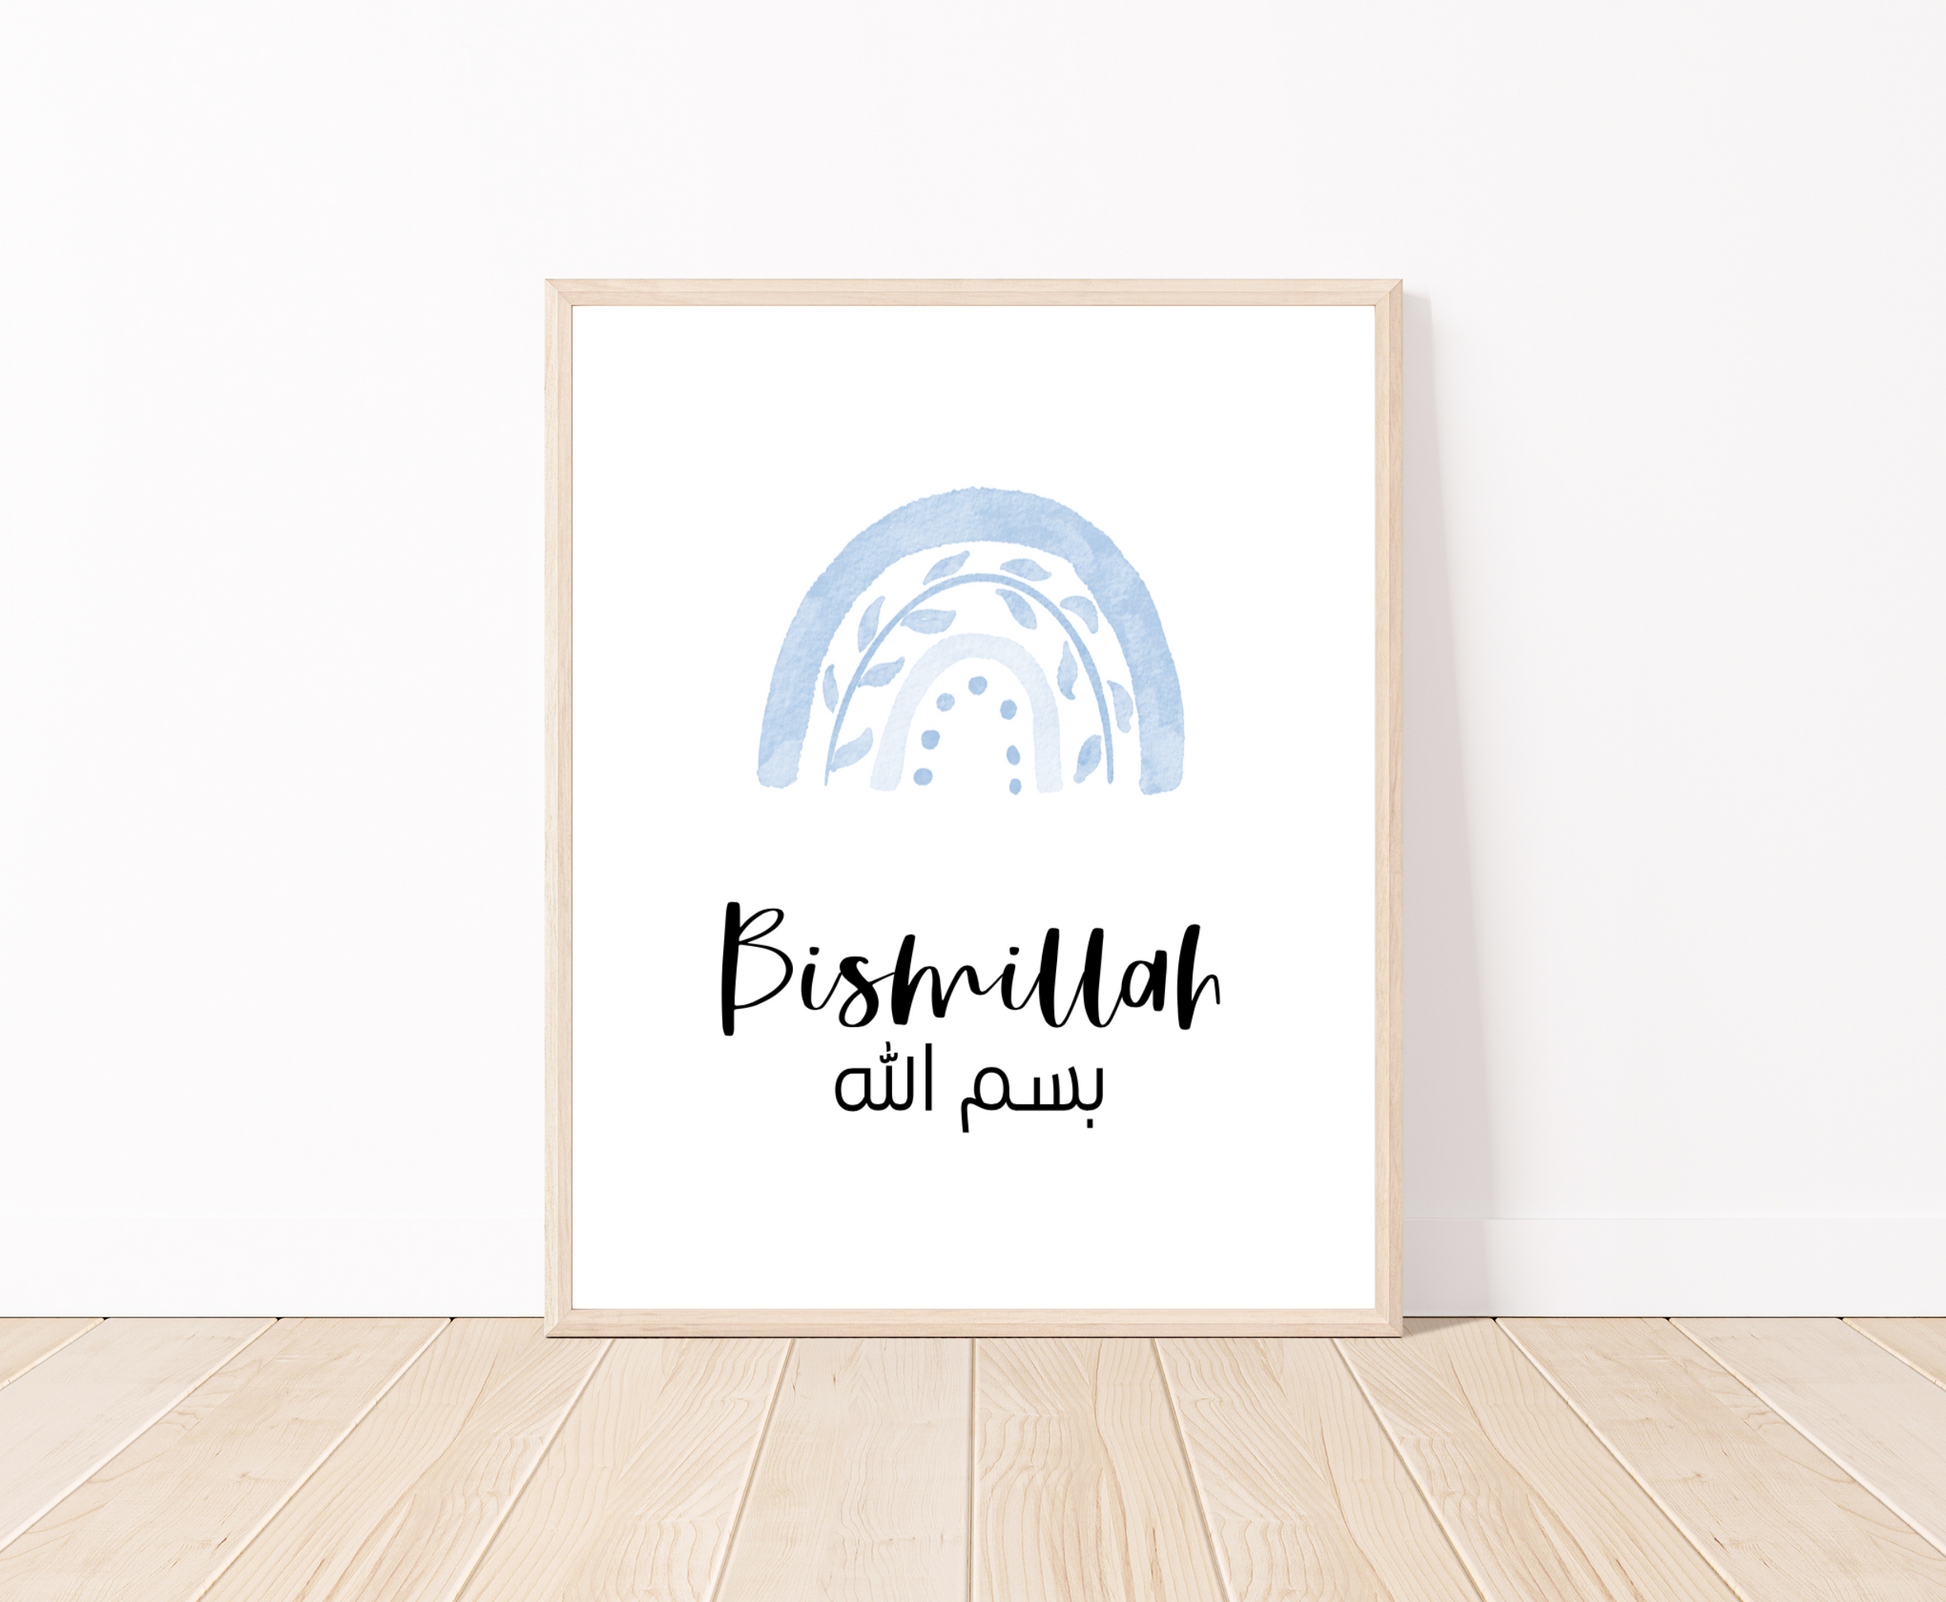 A digital print placed on a white wall and parquet flooring showing a blue rainbow with a piece of writing below that says: “Bismillah”.